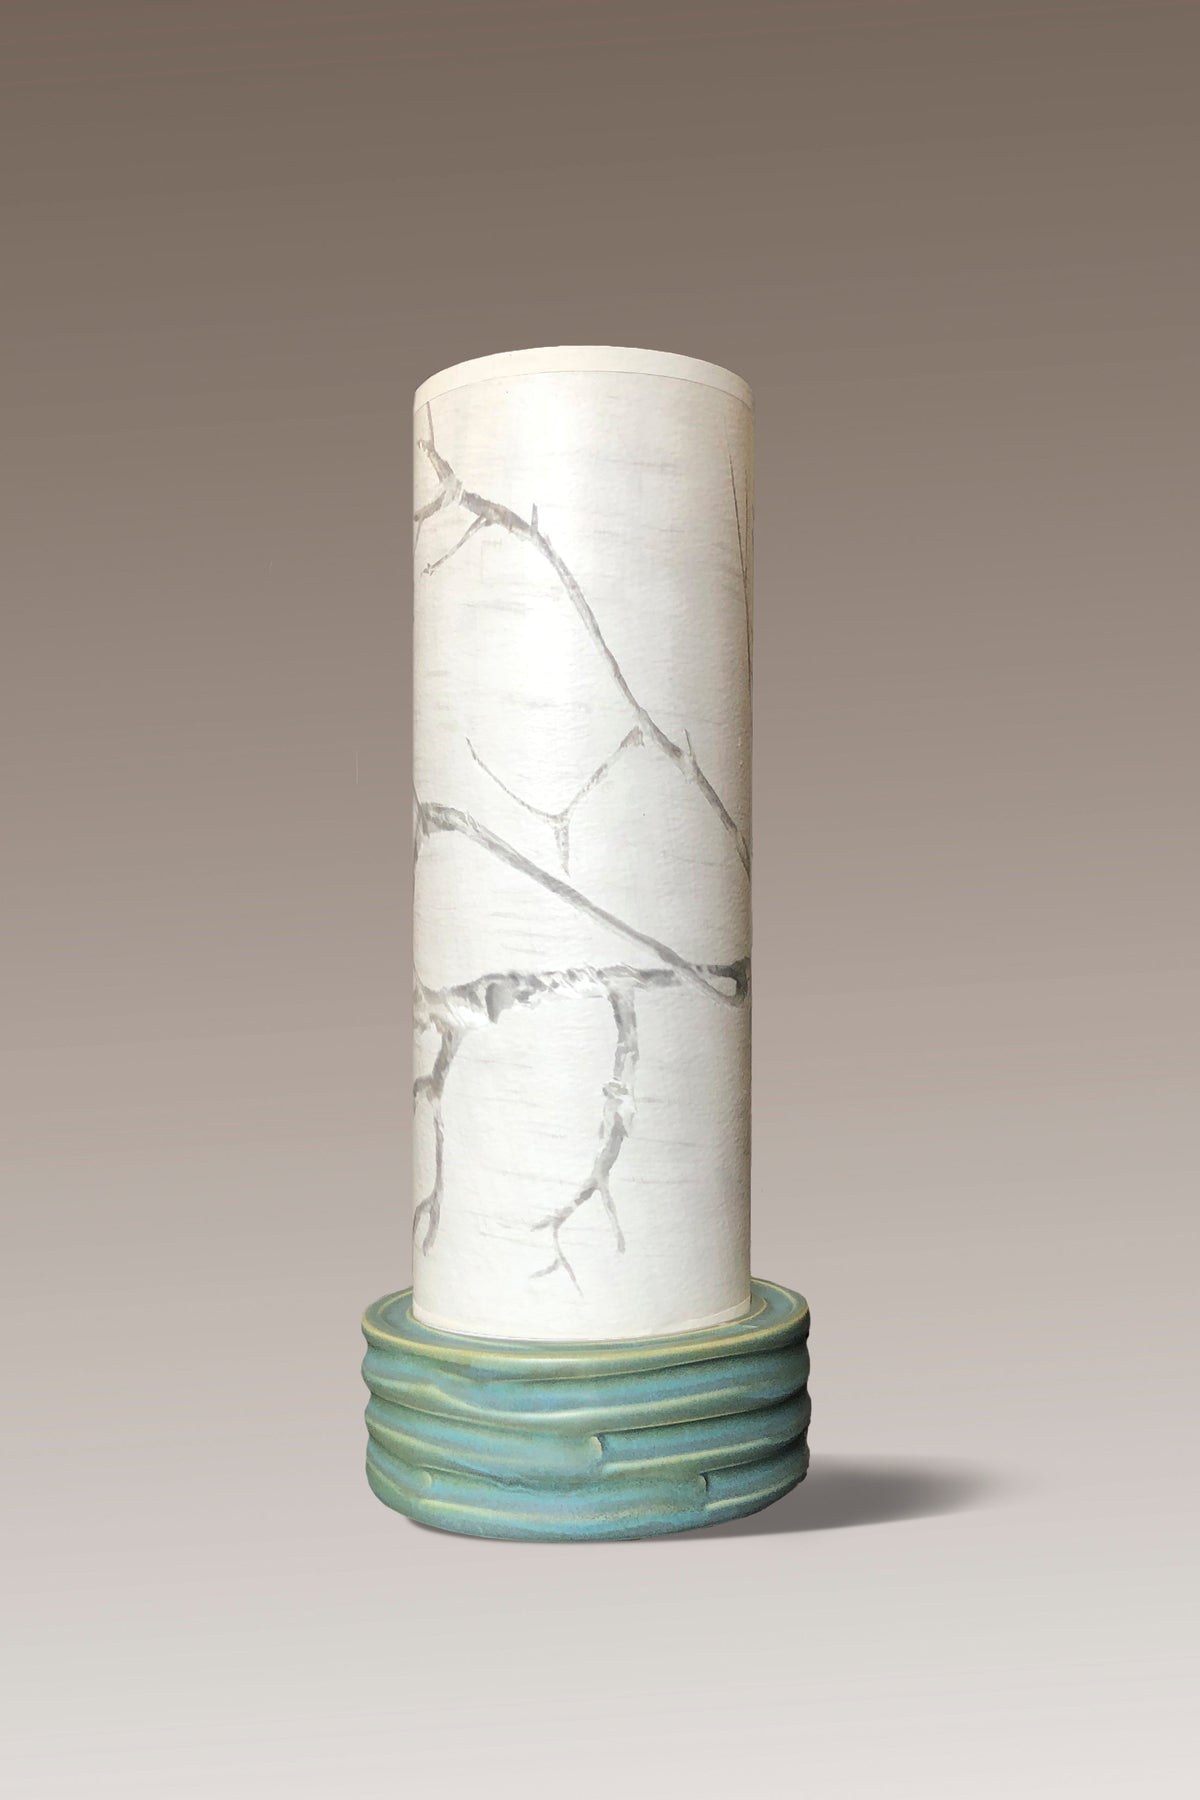 Janna Ugone &amp; Co Luminaires Ceramic Luminaire Accent Lamp with Sweeping Branch Shade